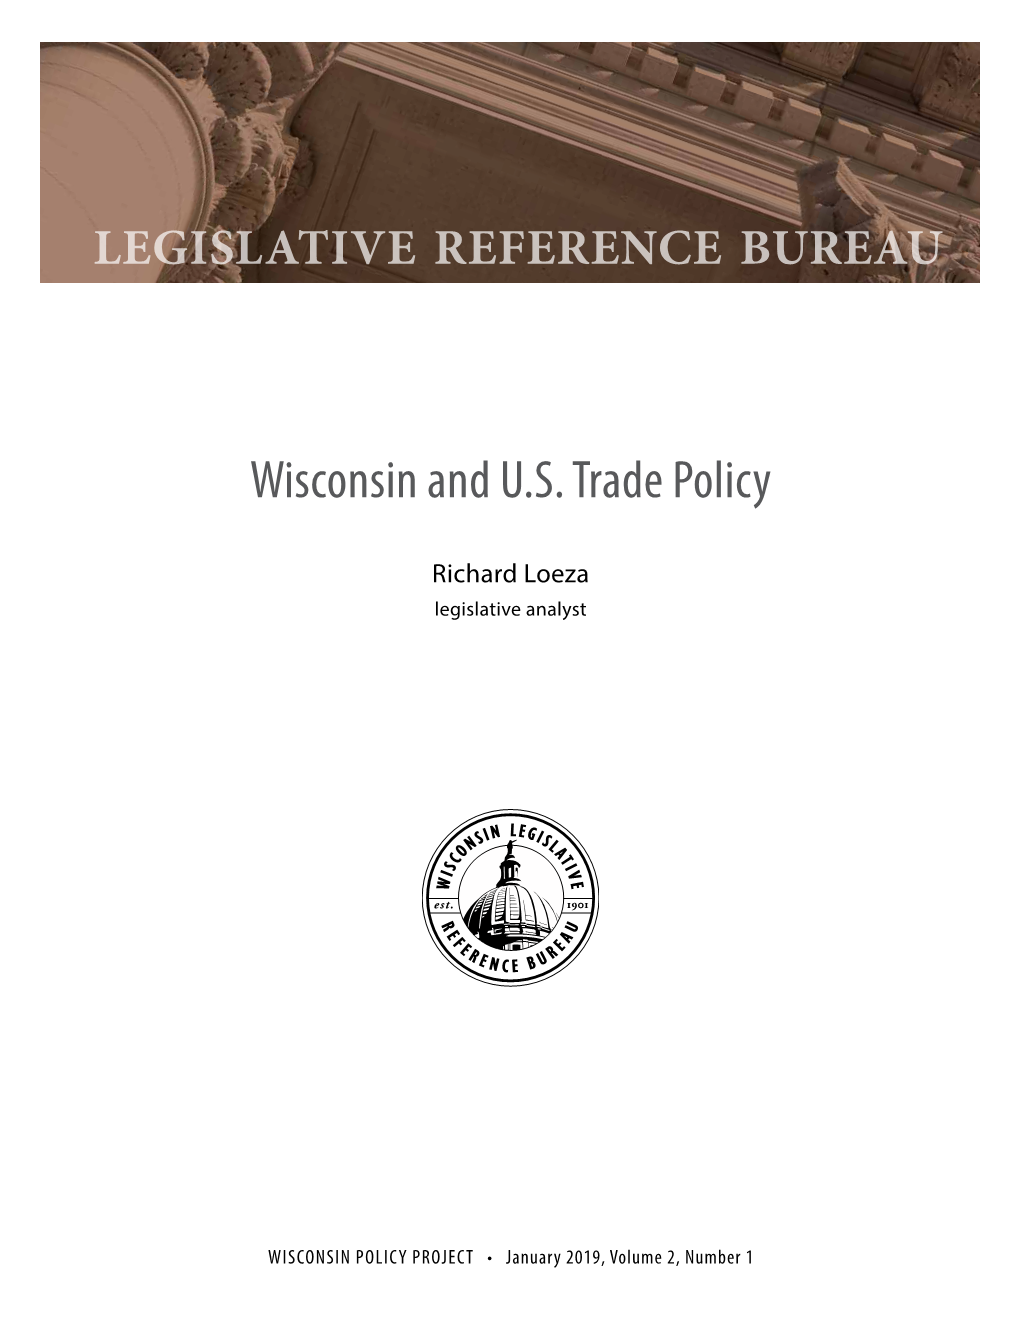 Wisconsin and U.S. Trade Policy